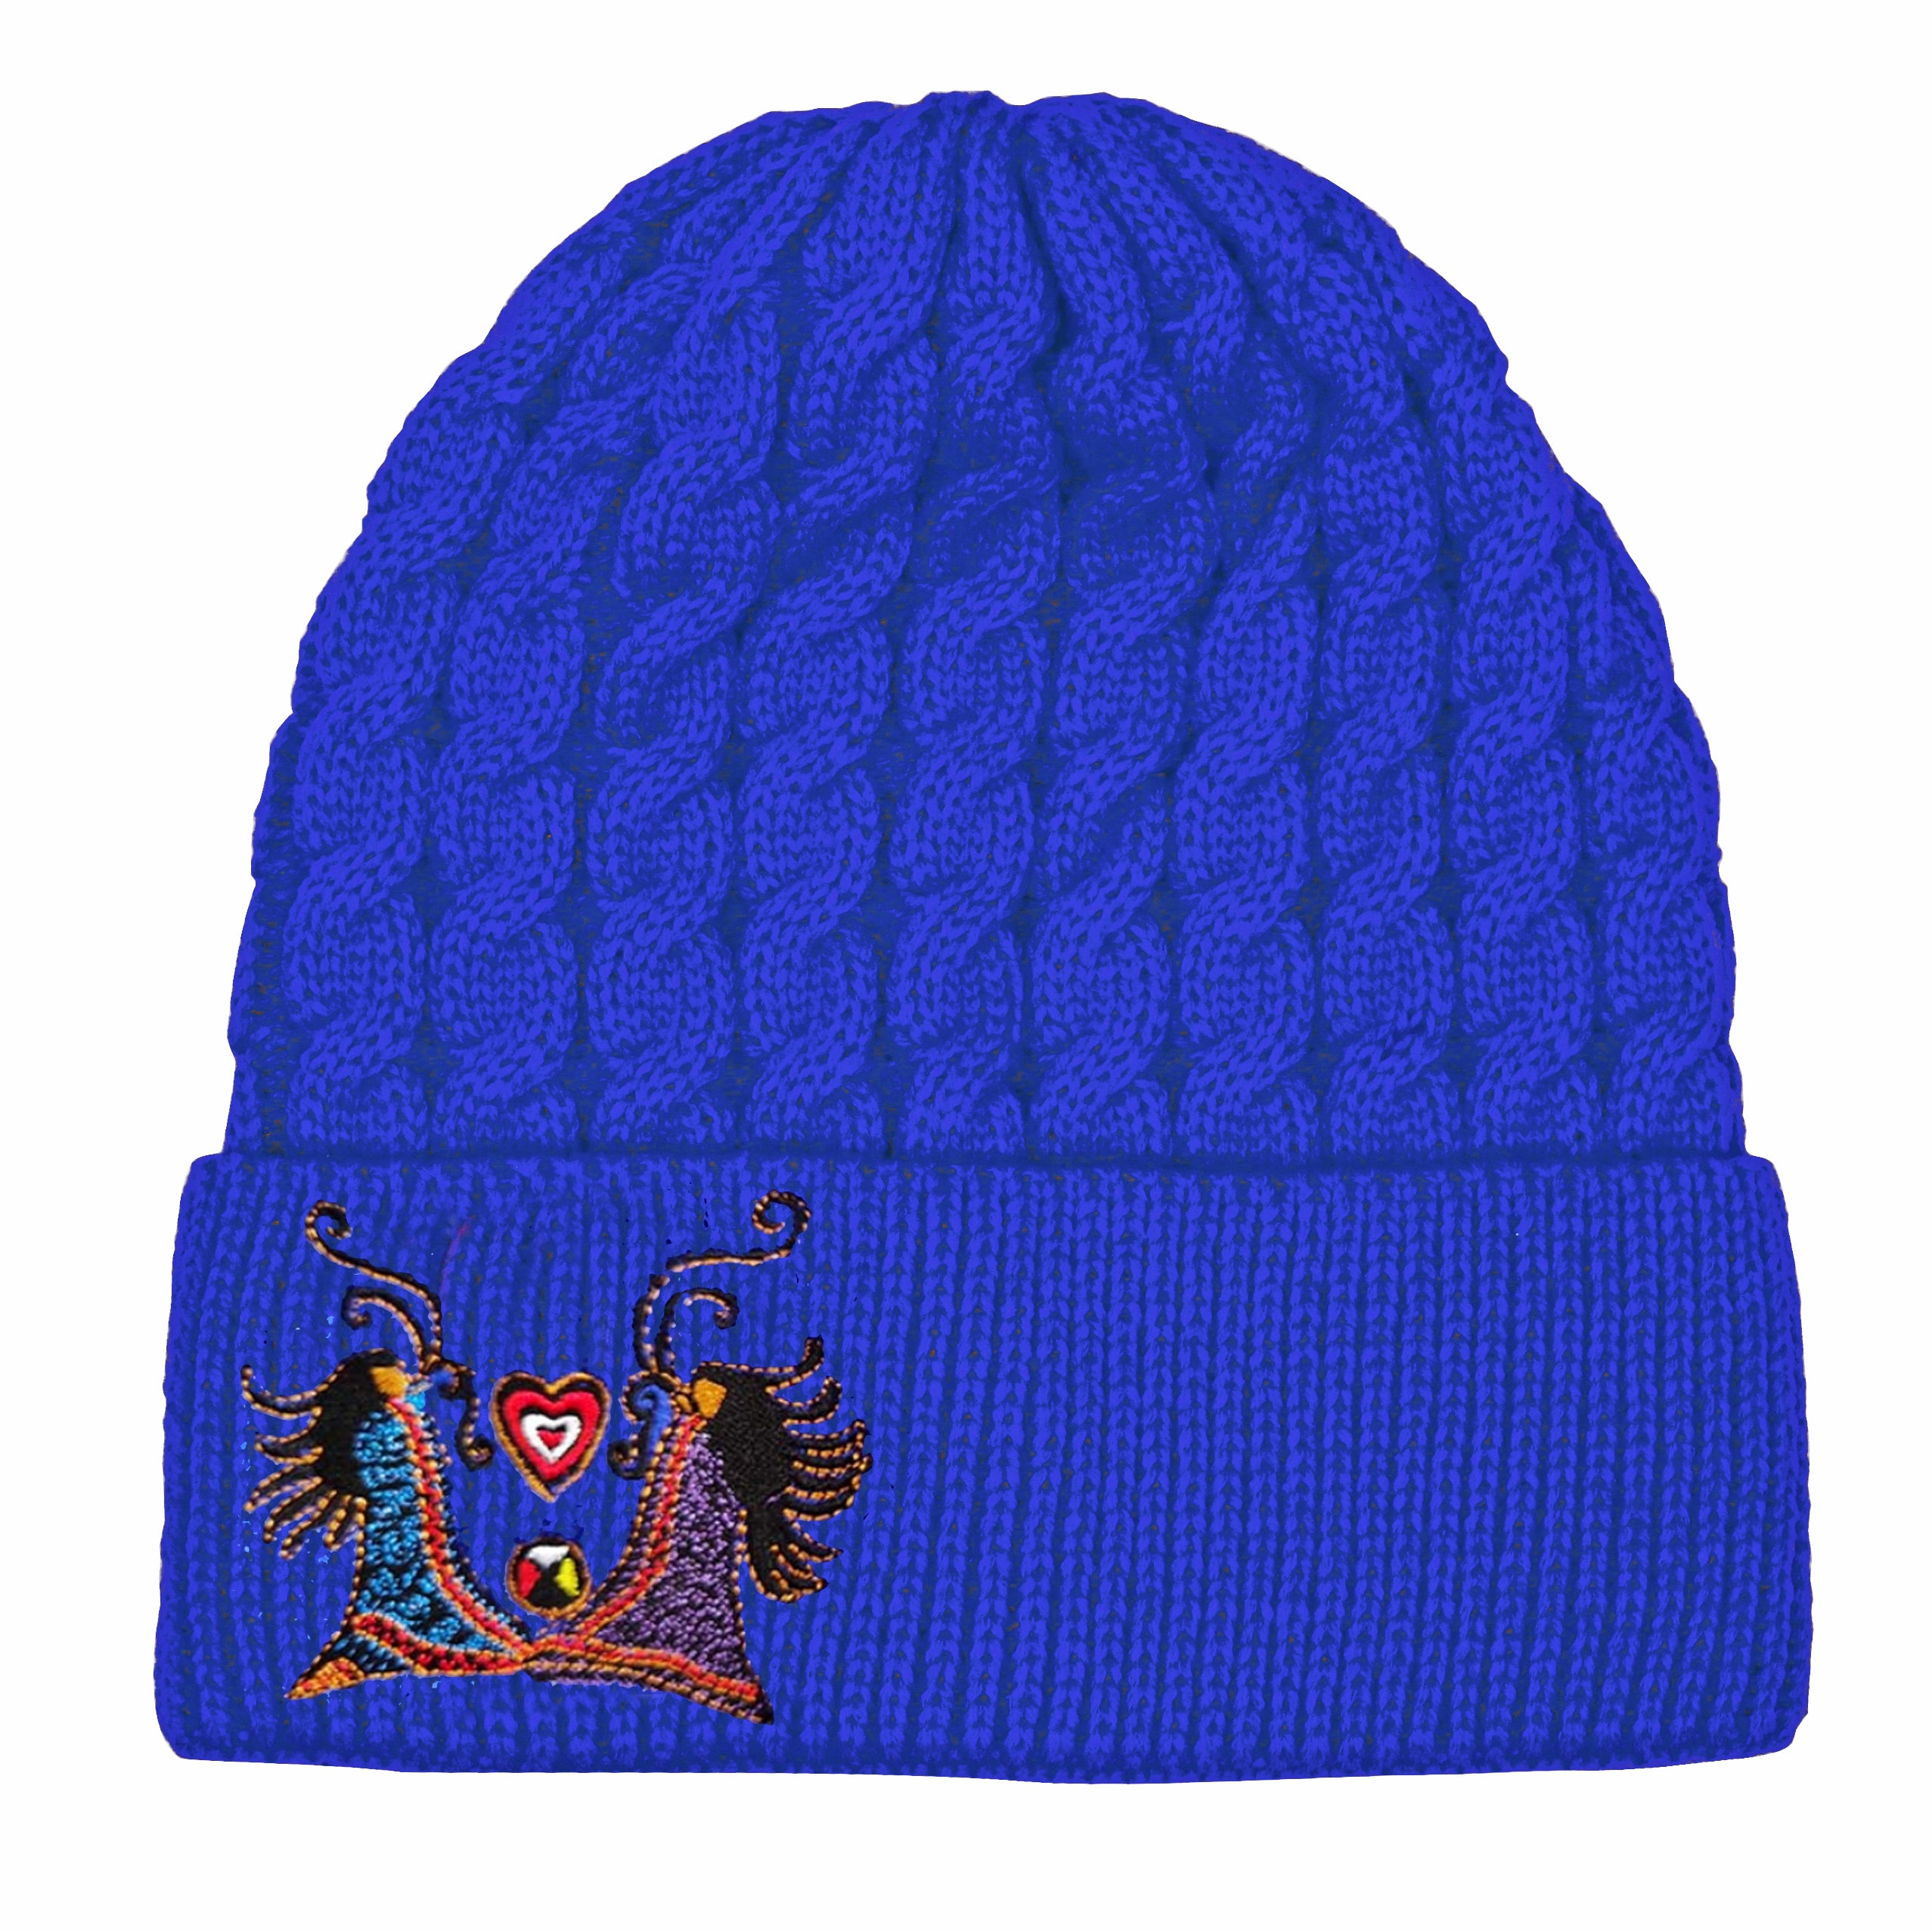 Leah Dorion Breath of Life Embroidered Knitted Hat